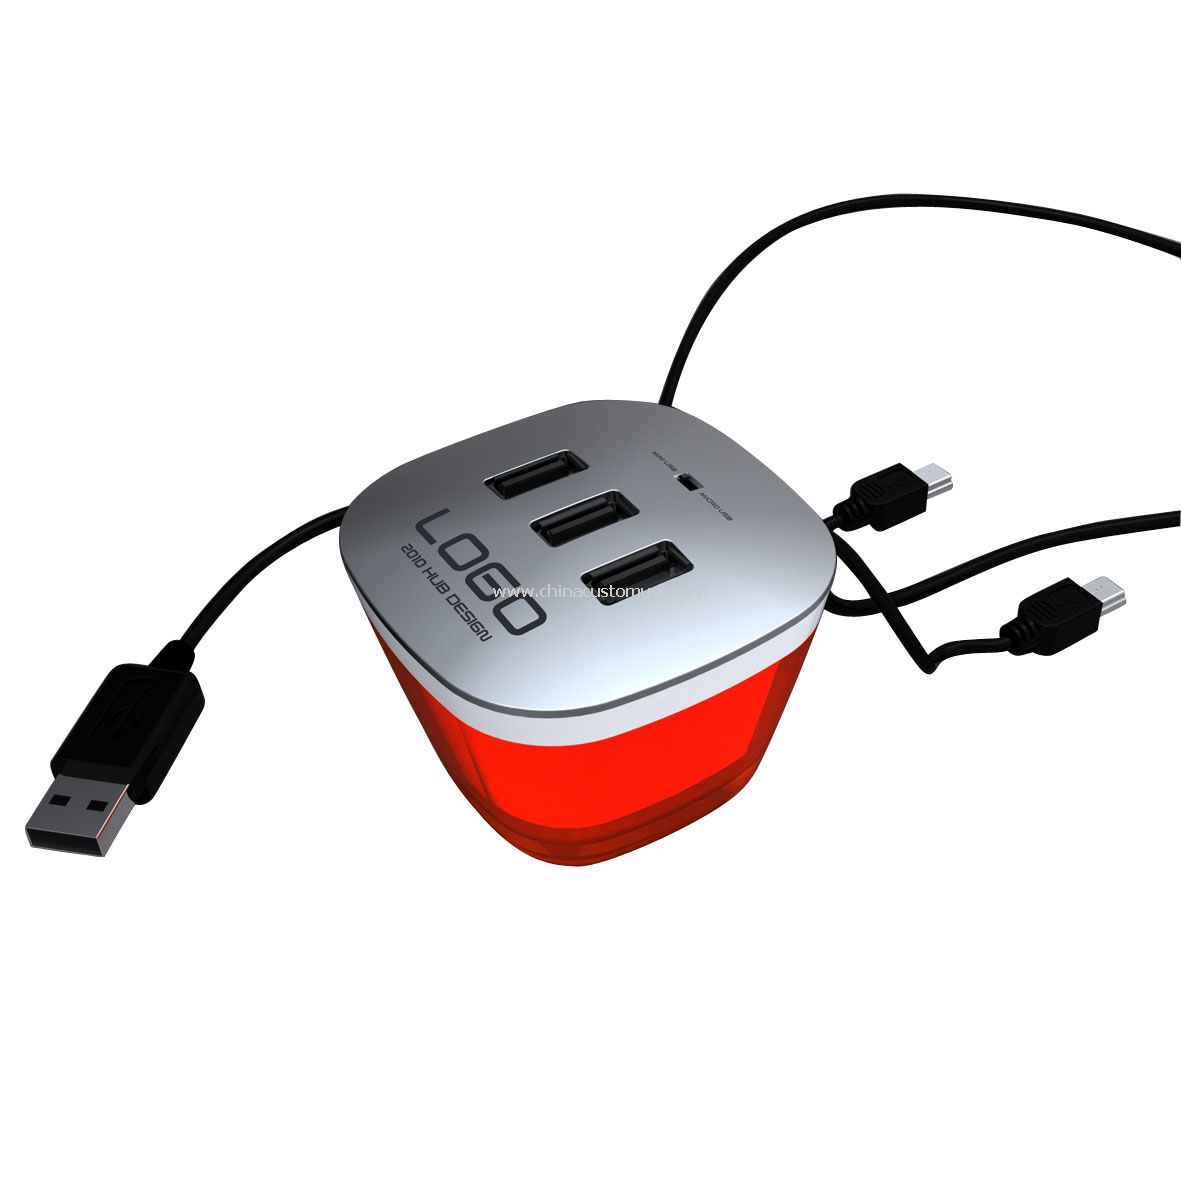 USB hub with mobile phone chargers